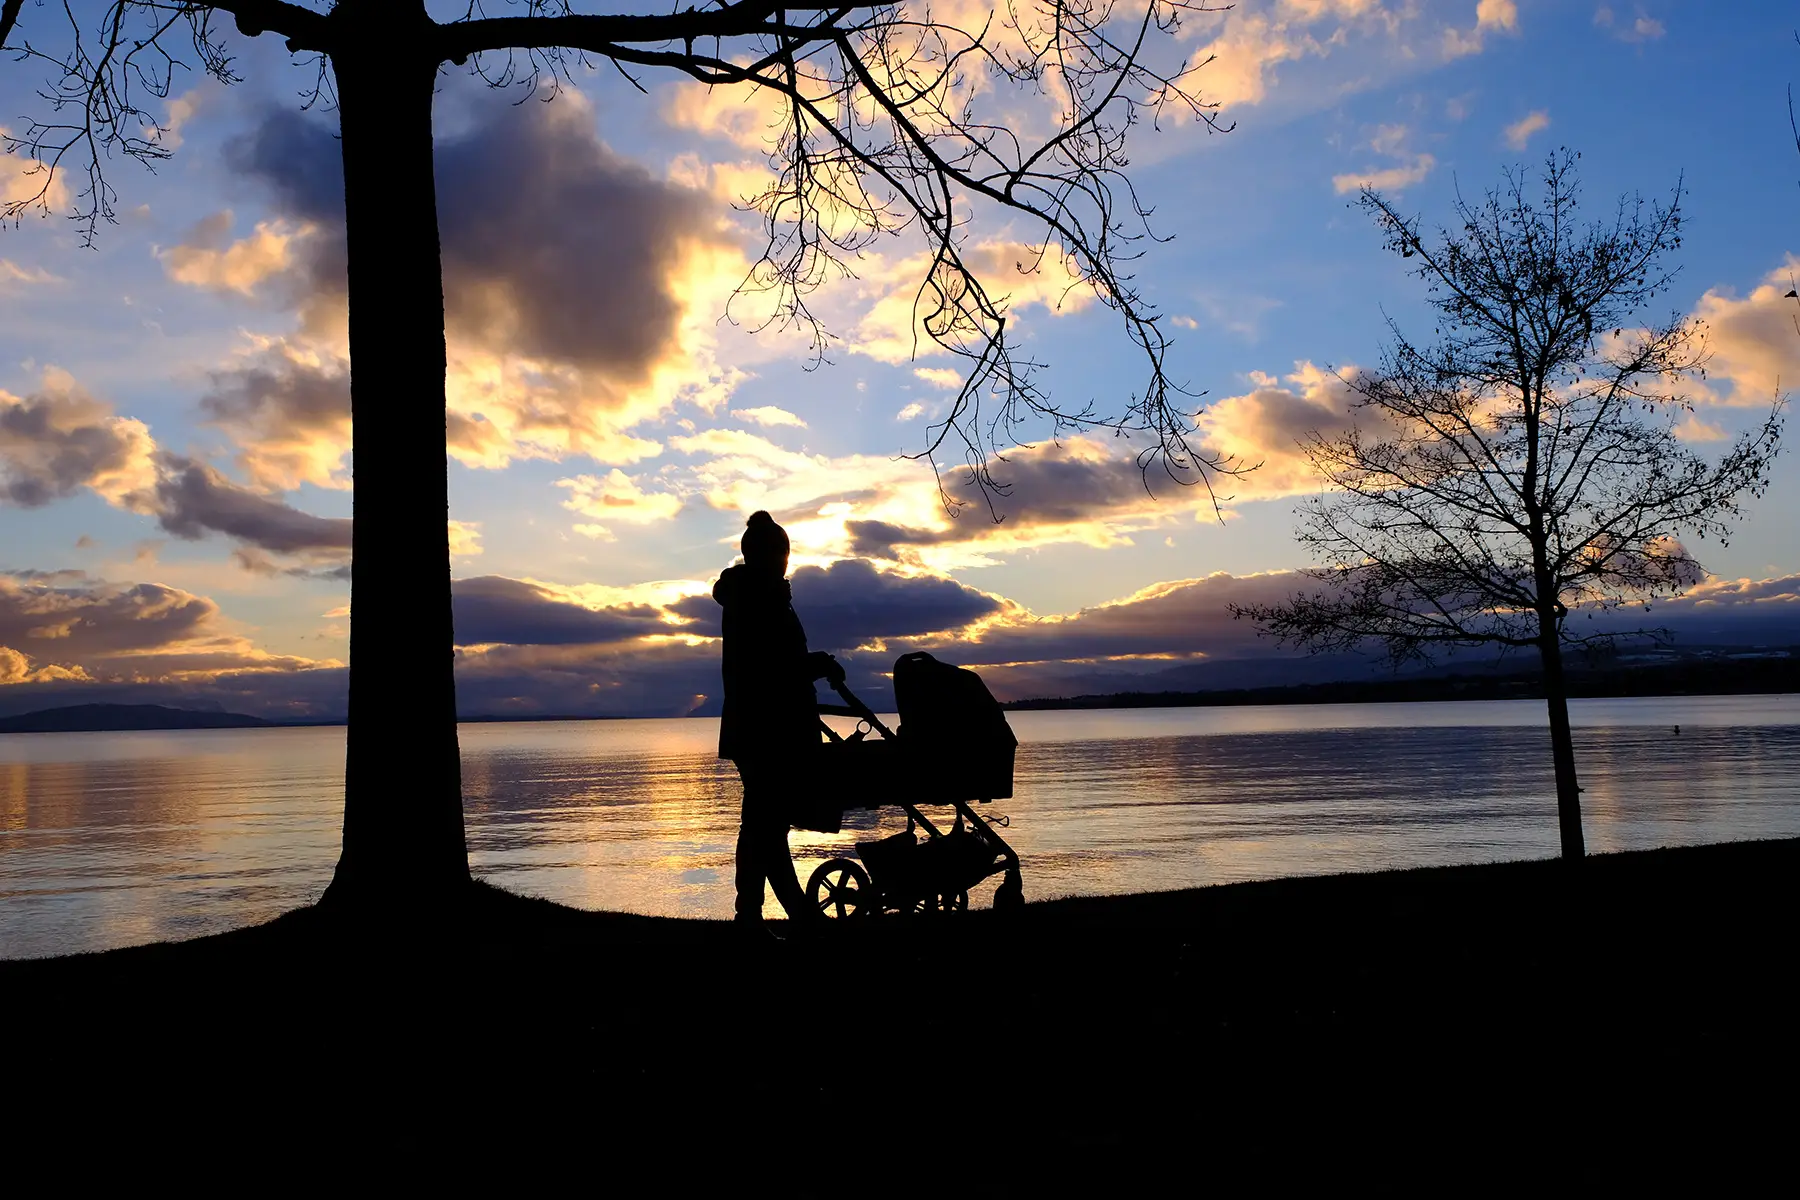 Black silhouette of a parent strolling along the banks of Lake Geneva at sunset with a baby in the stroller